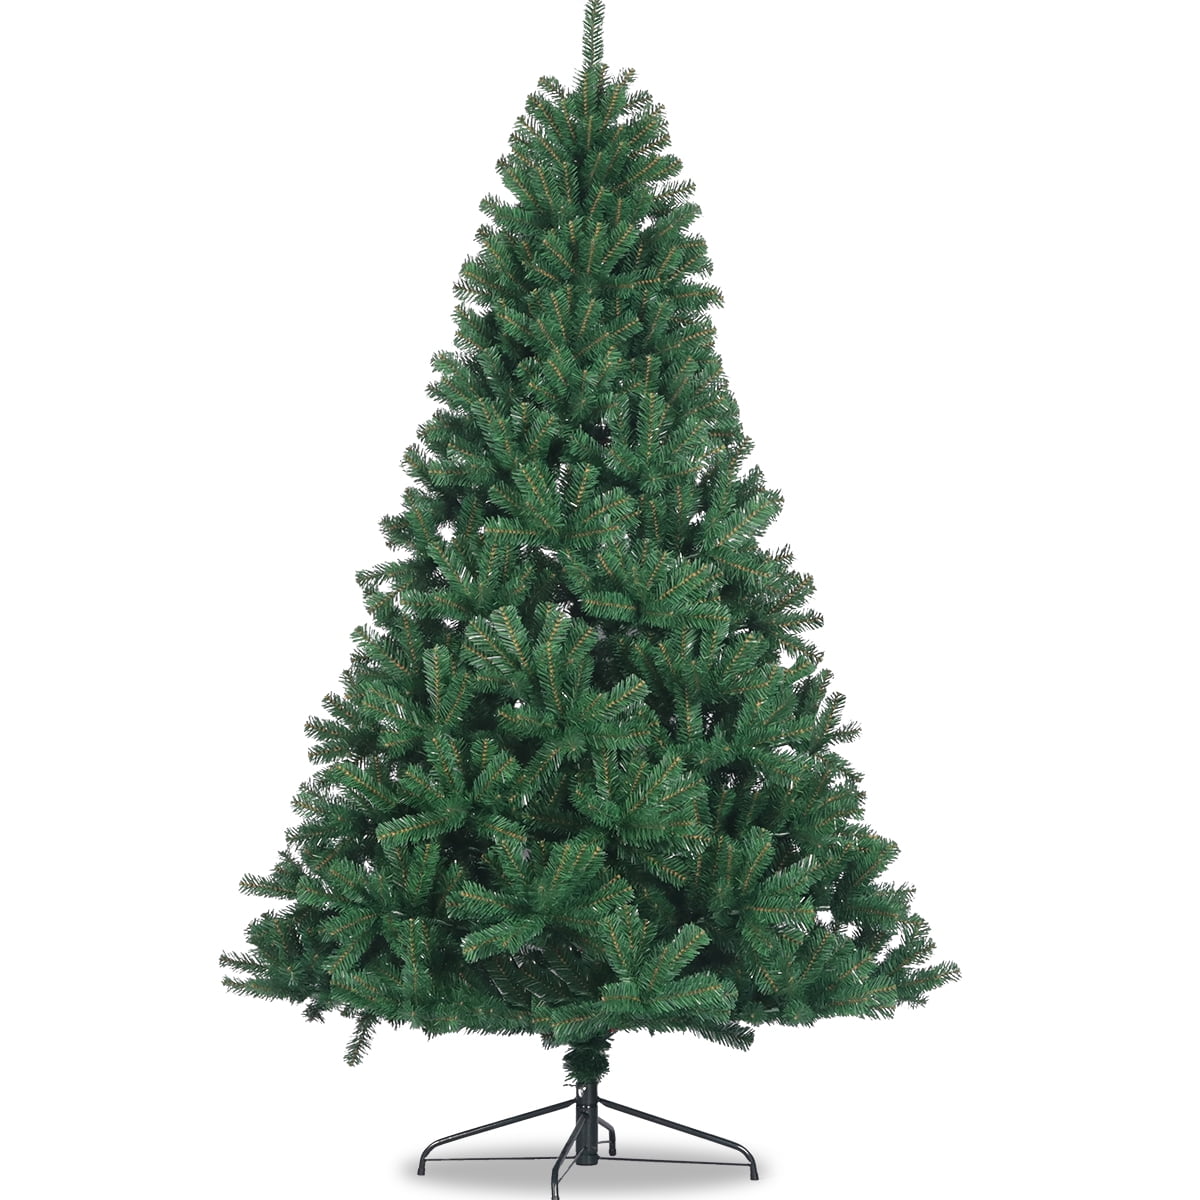  Christmas Green Tree Magnetic Fireplace Cover 51x39